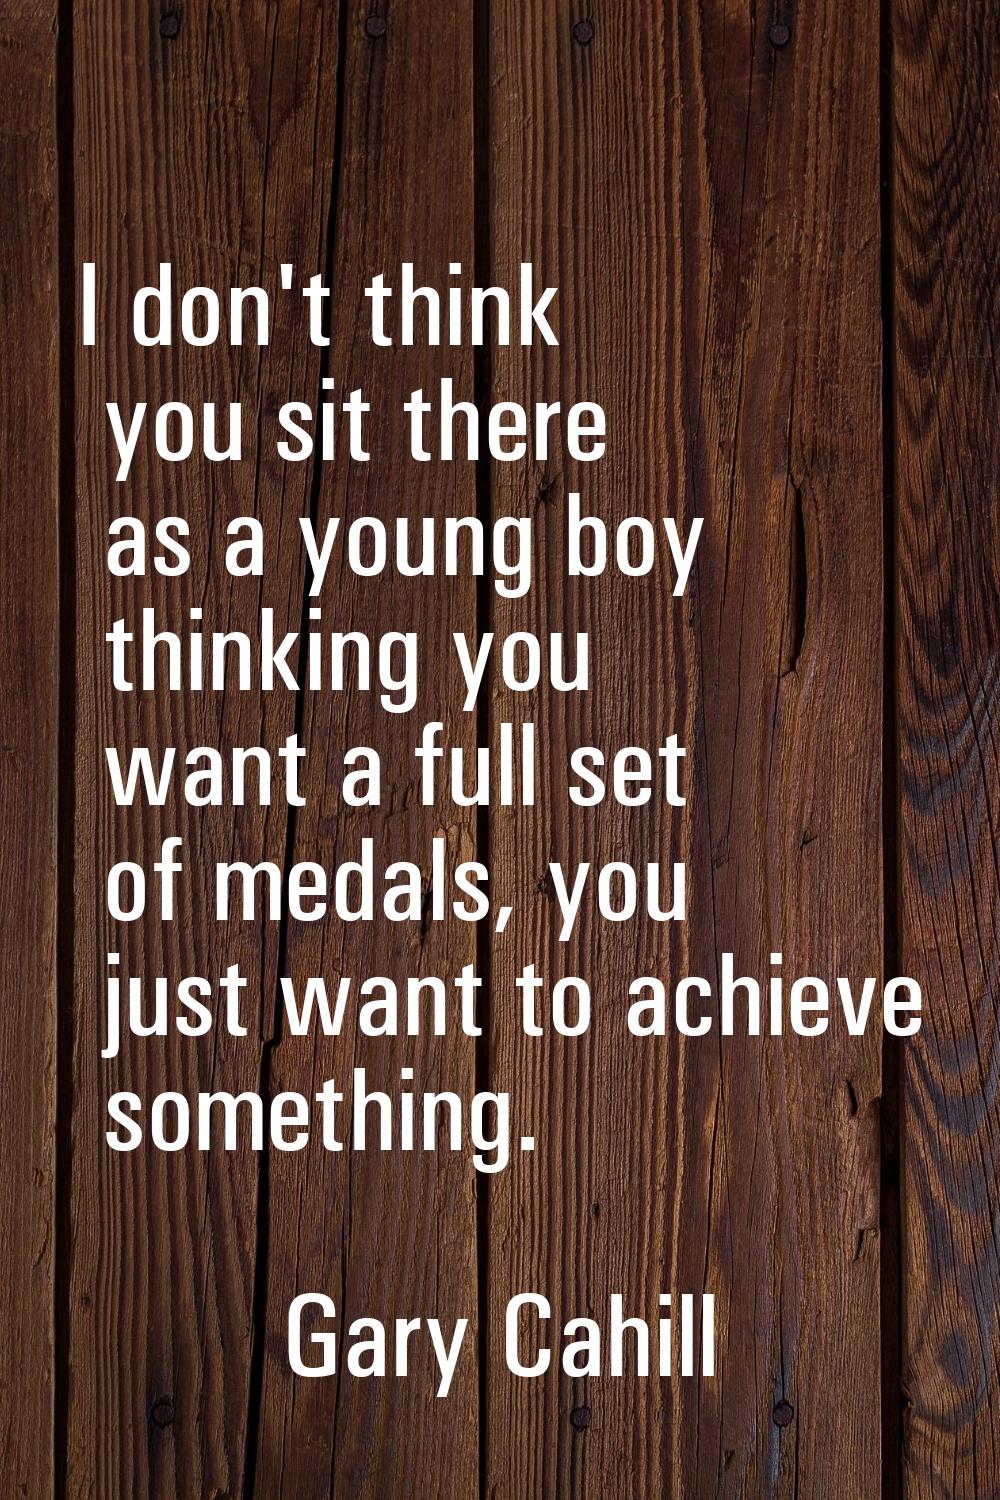 I don't think you sit there as a young boy thinking you want a full set of medals, you just want to